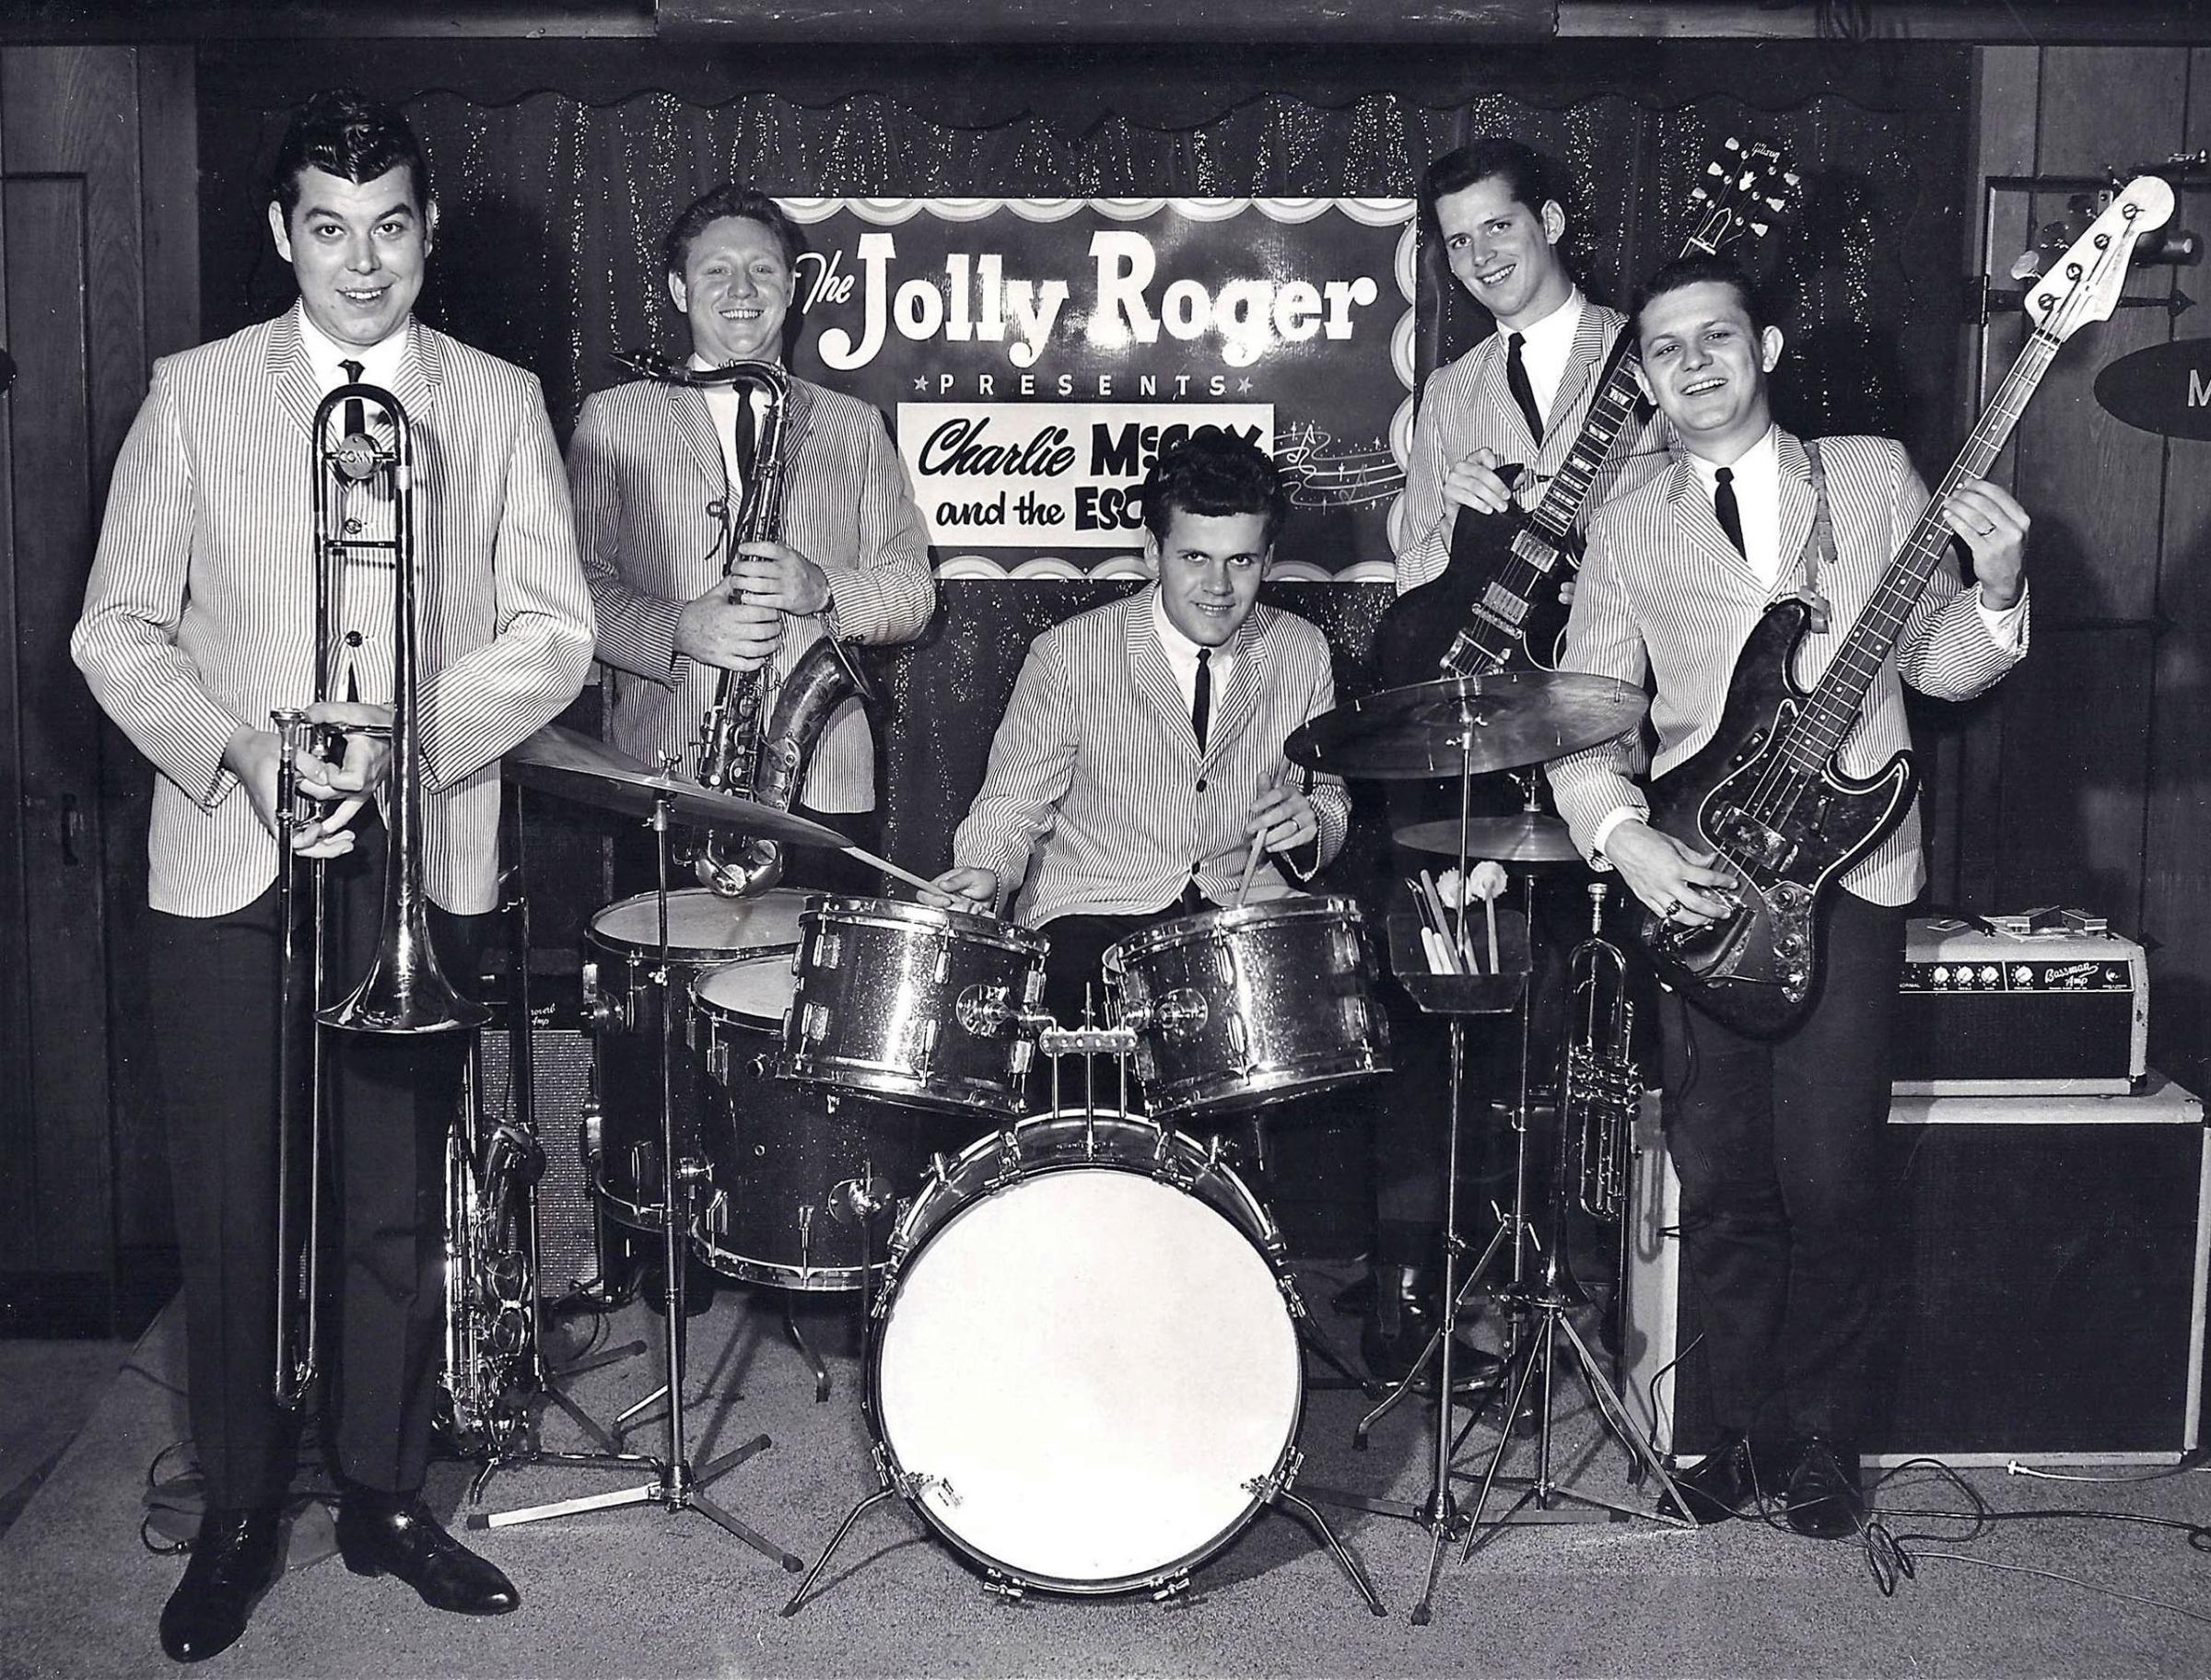 Charlie McCoy and the Escorts perform at the Jolly Roger in Printers Alley, circa 1965. Pictured are (l-r): Wayne Butler, Jerry Tuttle, Kenny Buttrey, Mac Gayden, and Charlie McCoy.